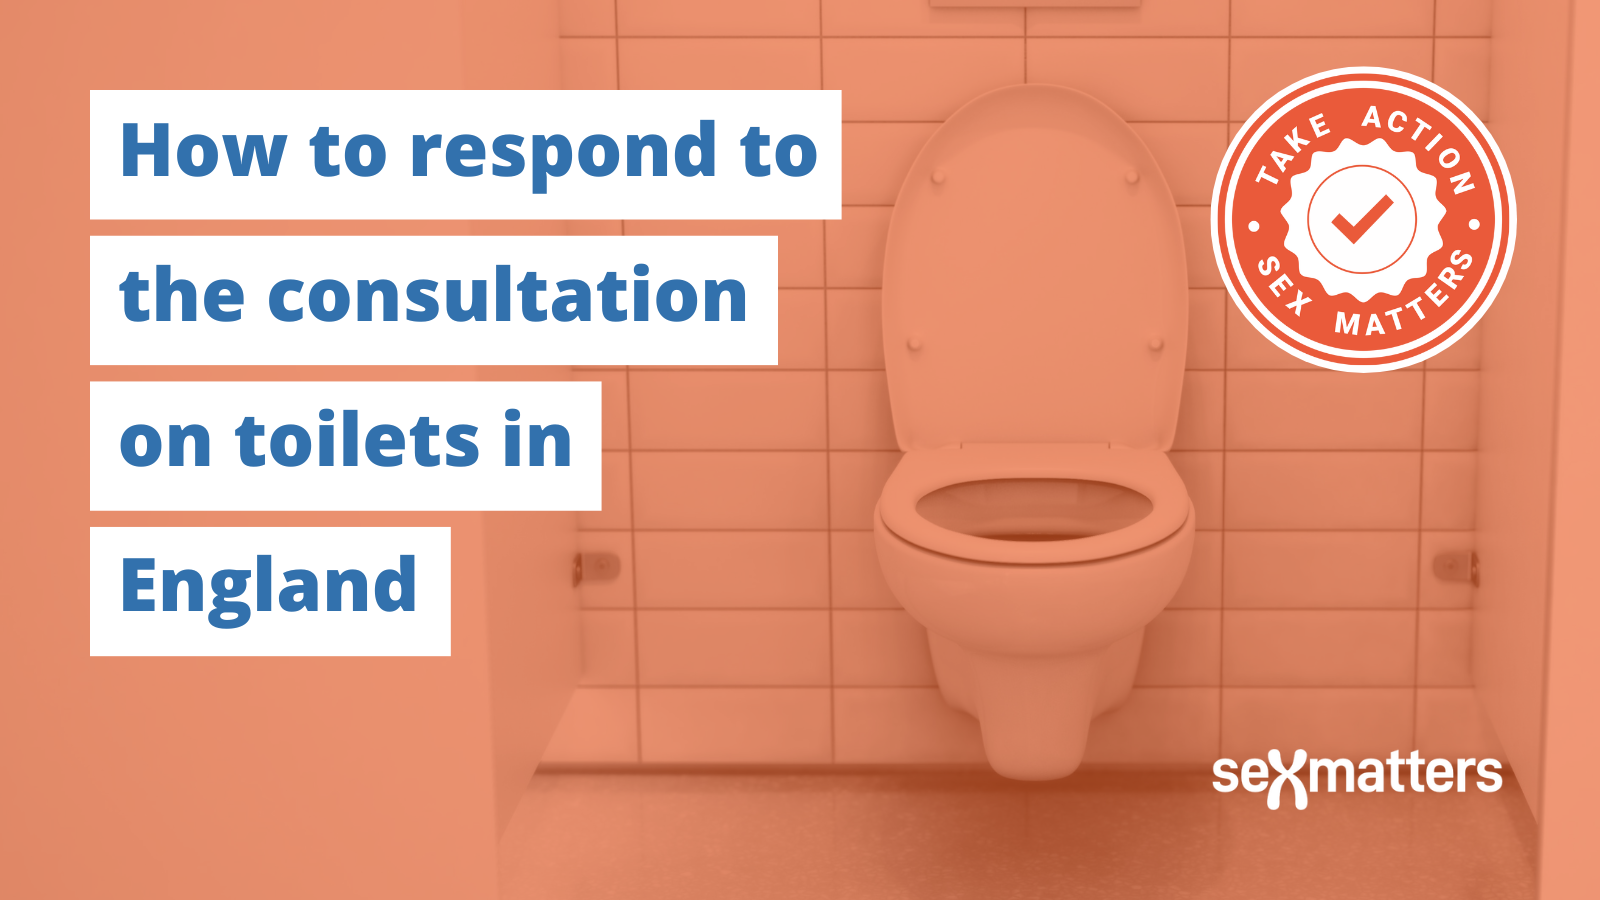 How to respond to the consultation on toilets in England